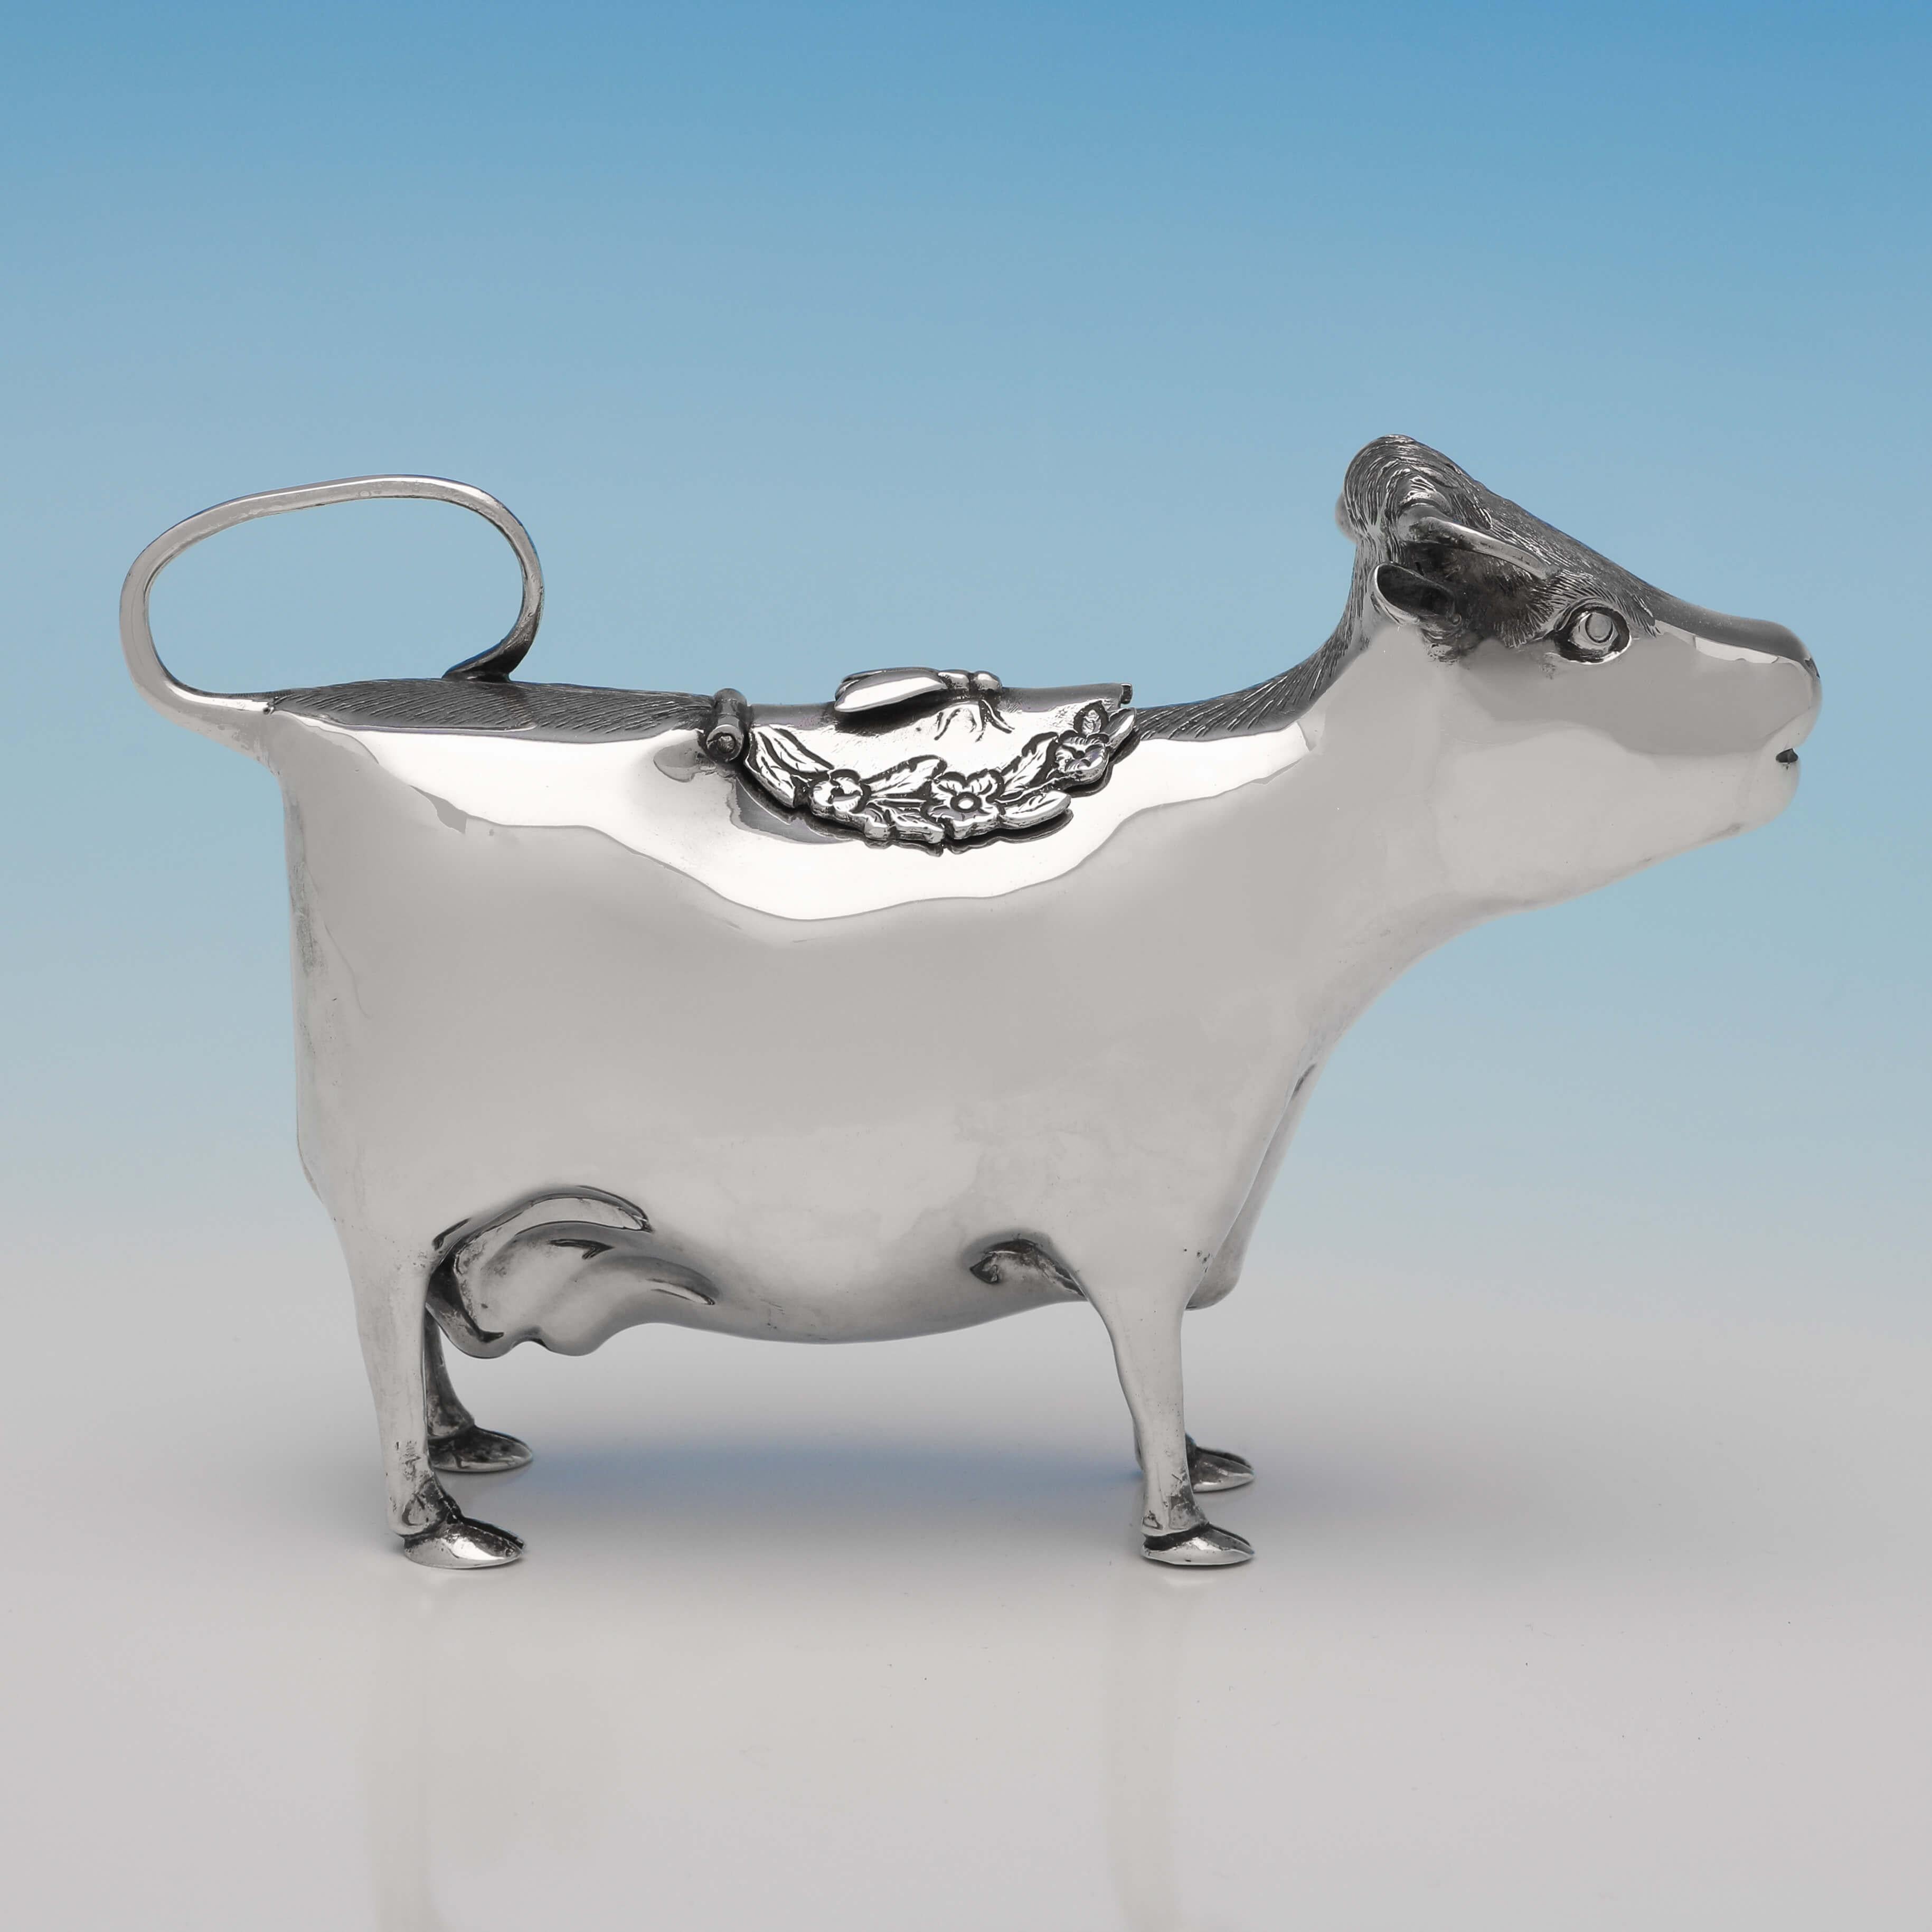 Hallmarked in London in 1968 by William Comyns, this charming, sterling silver cow creamer, is full of character. The cow creamer measures 4